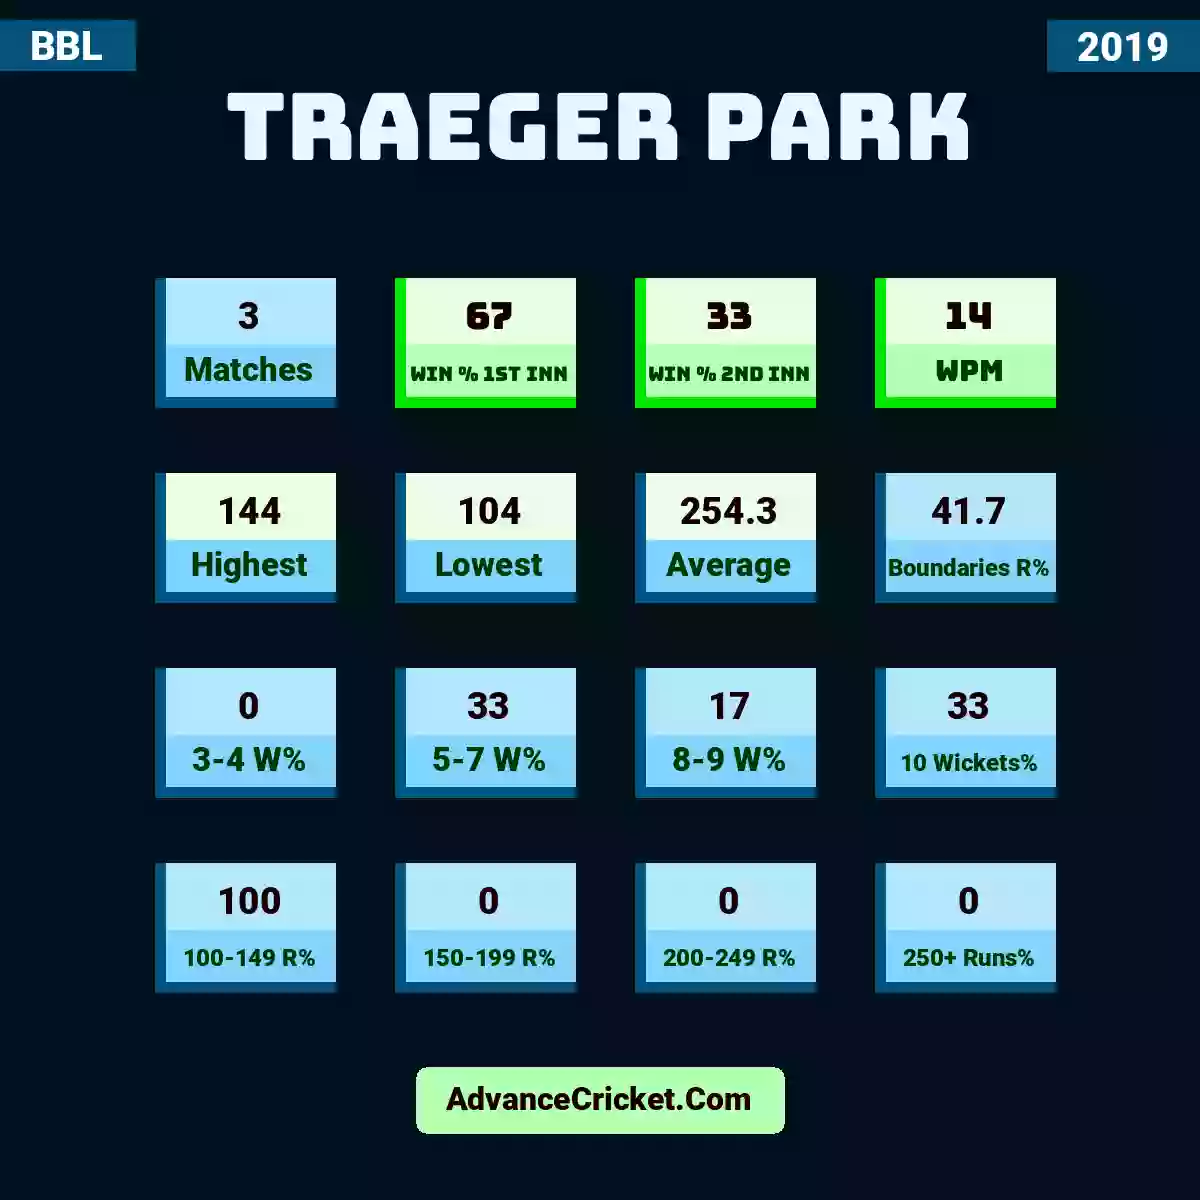 Image showing Traeger Park with Matches: 3, Win % 1st Inn: 67, Win % 2nd Inn: 33, WPM: 14, Highest: 144, Lowest: 104, Average: 254.3, Boundaries R%: 41.7, 3-4 W%: 0, 5-7 W%: 33, 8-9 W%: 17, 10 Wickets%: 33, 100-149 R%: 100, 150-199 R%: 0, 200-249 R%: 0, 250+ Runs%: 0.